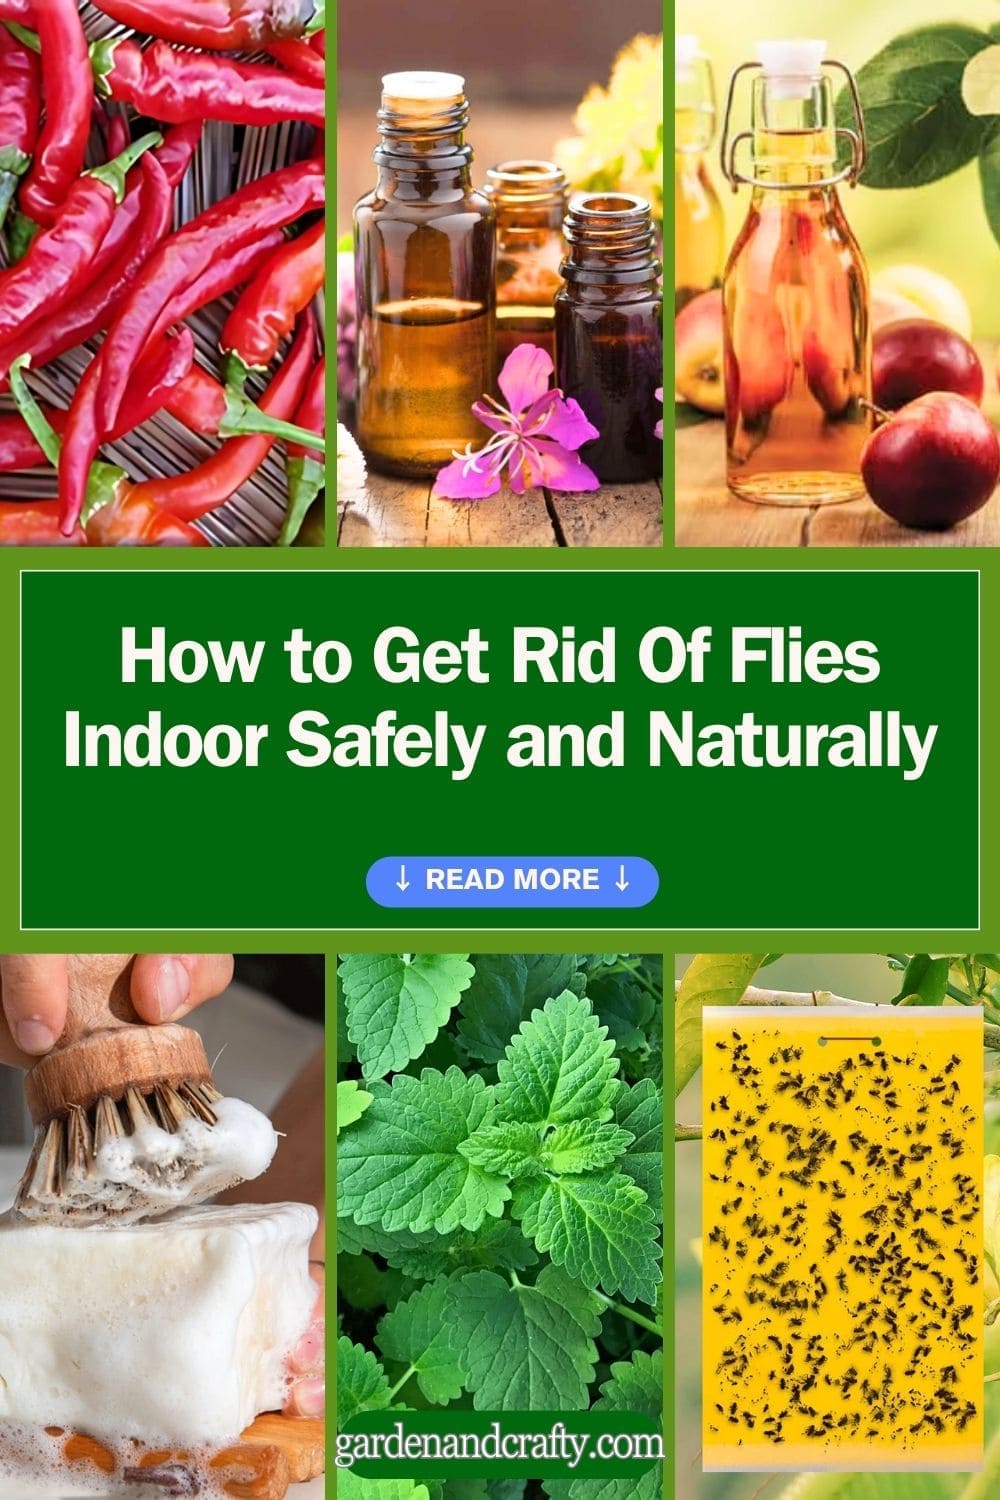 How to Get Rid Of Flies Indoor Safely and Naturally